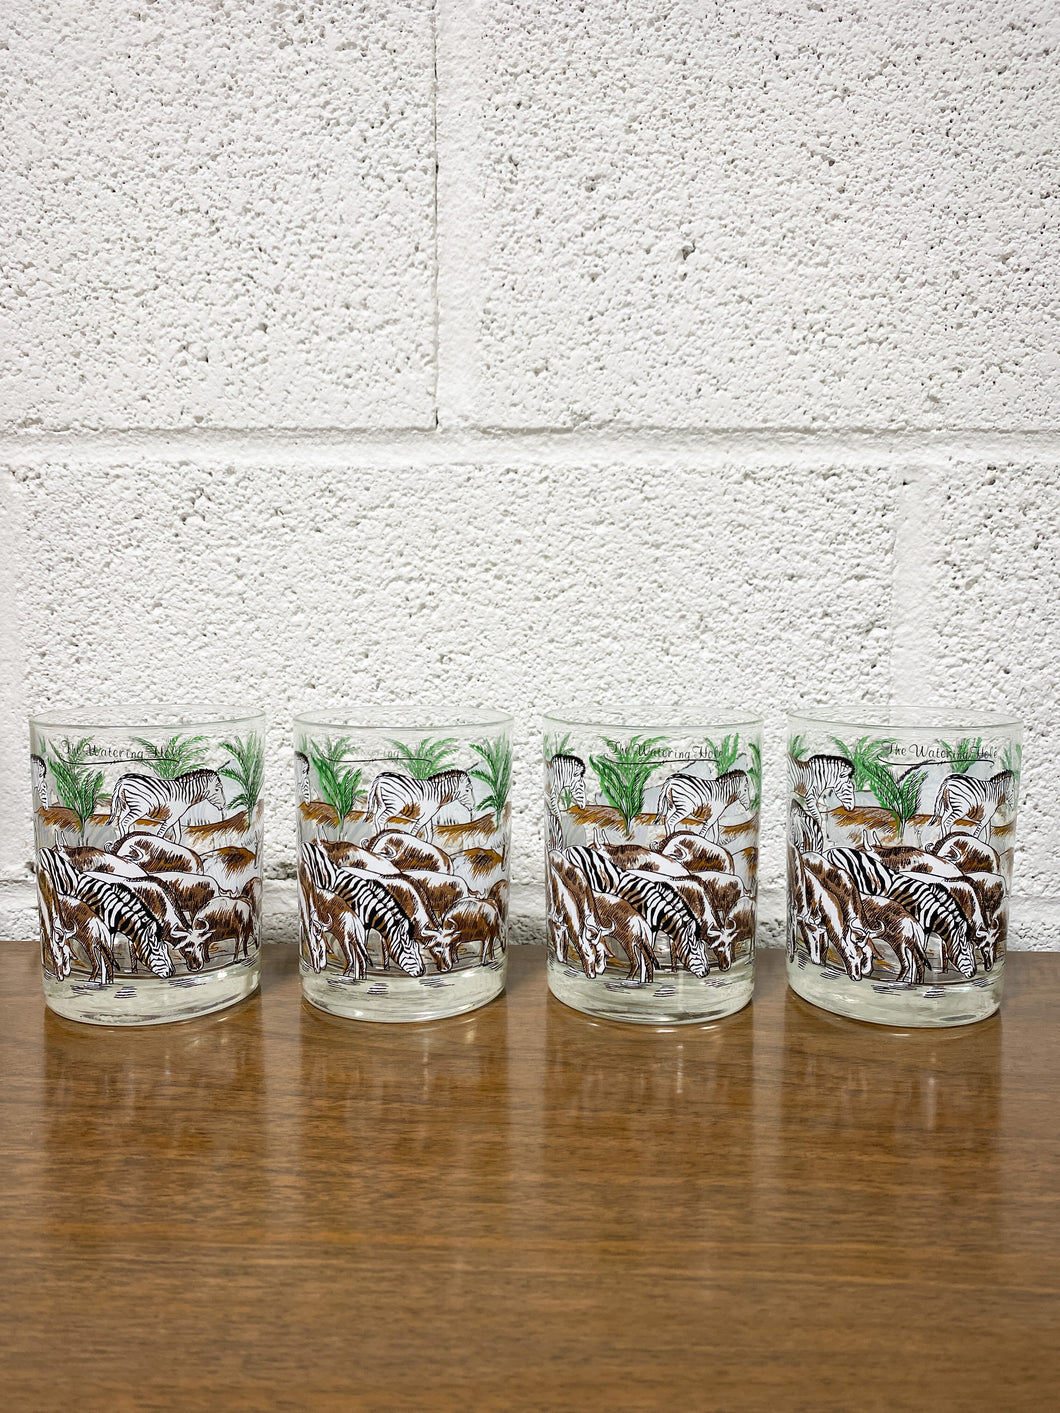 Vintage Set of 4 Cera “The Watering Hole” Glasses